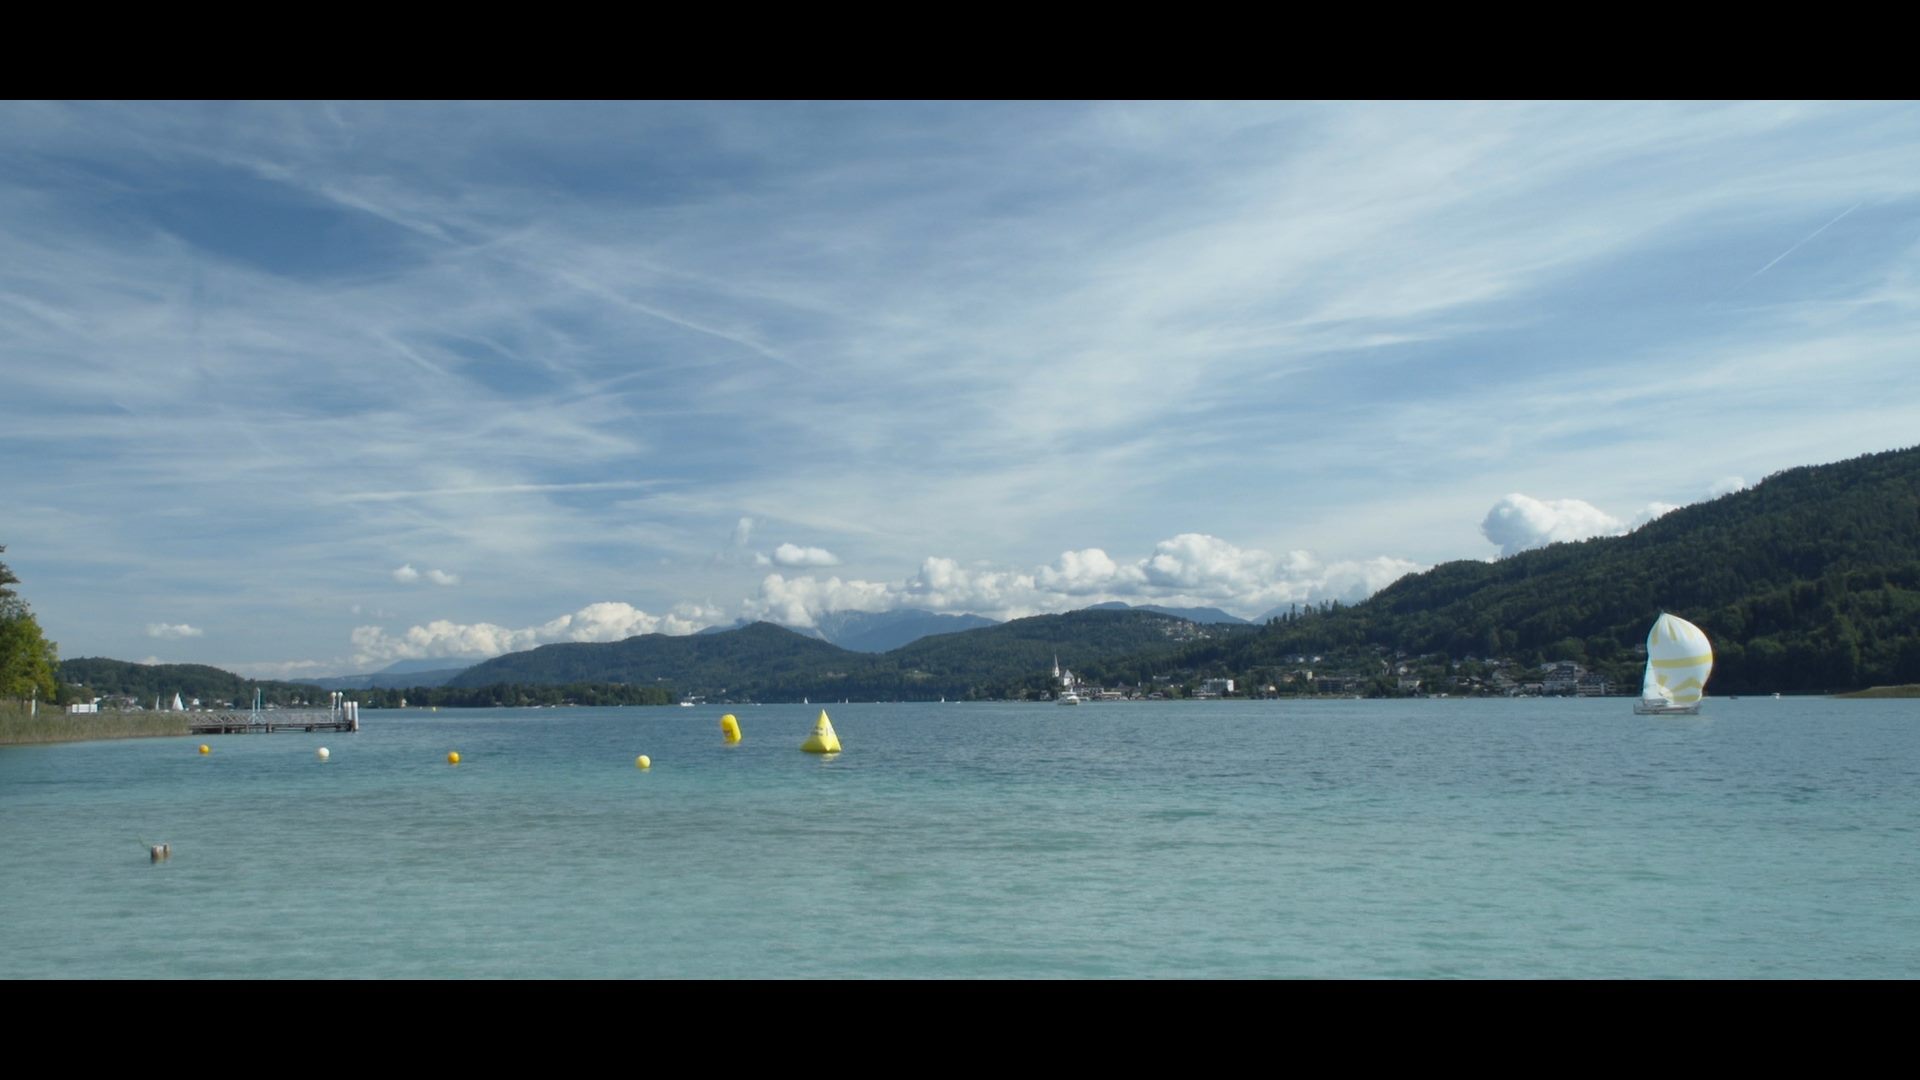 A group of sailboats in a body of water at Austria Swim Open.